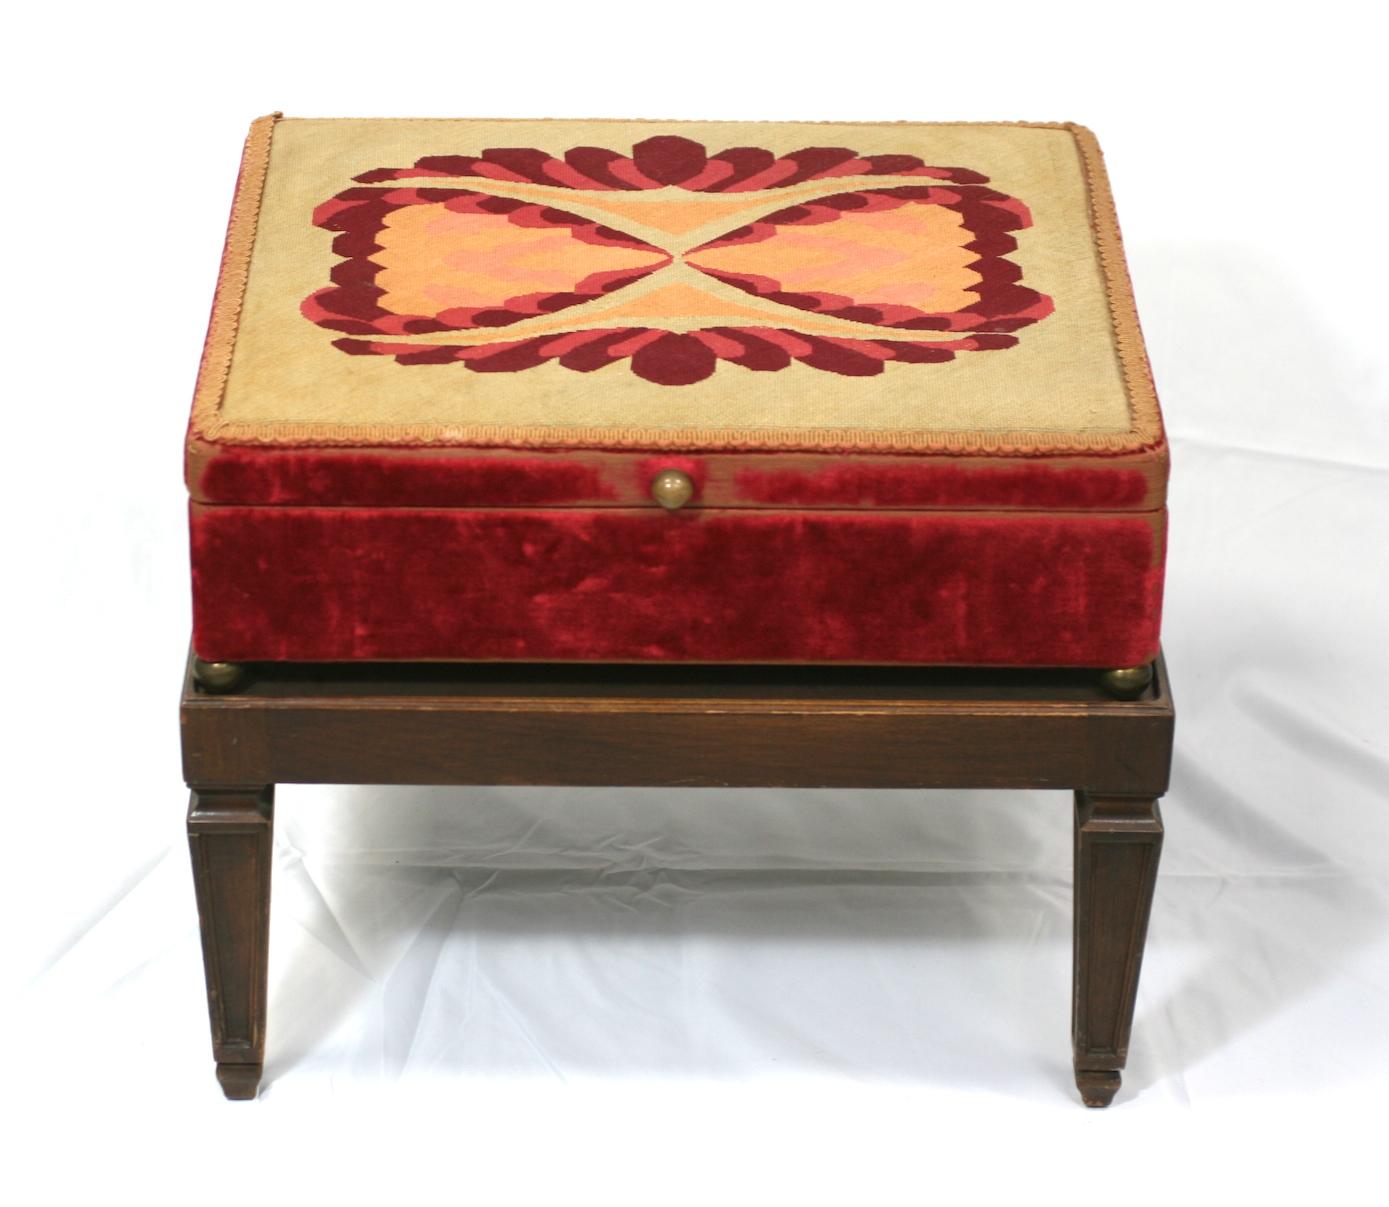 Attractive needlepoint box on stand with burgundy velvet sides which comes from a Dorothy Draper designed interior in Purchase NY. Box is lined in cream brocade and velvet is nicely weathered. Brass ball feet and finial on box.
Decorative accent